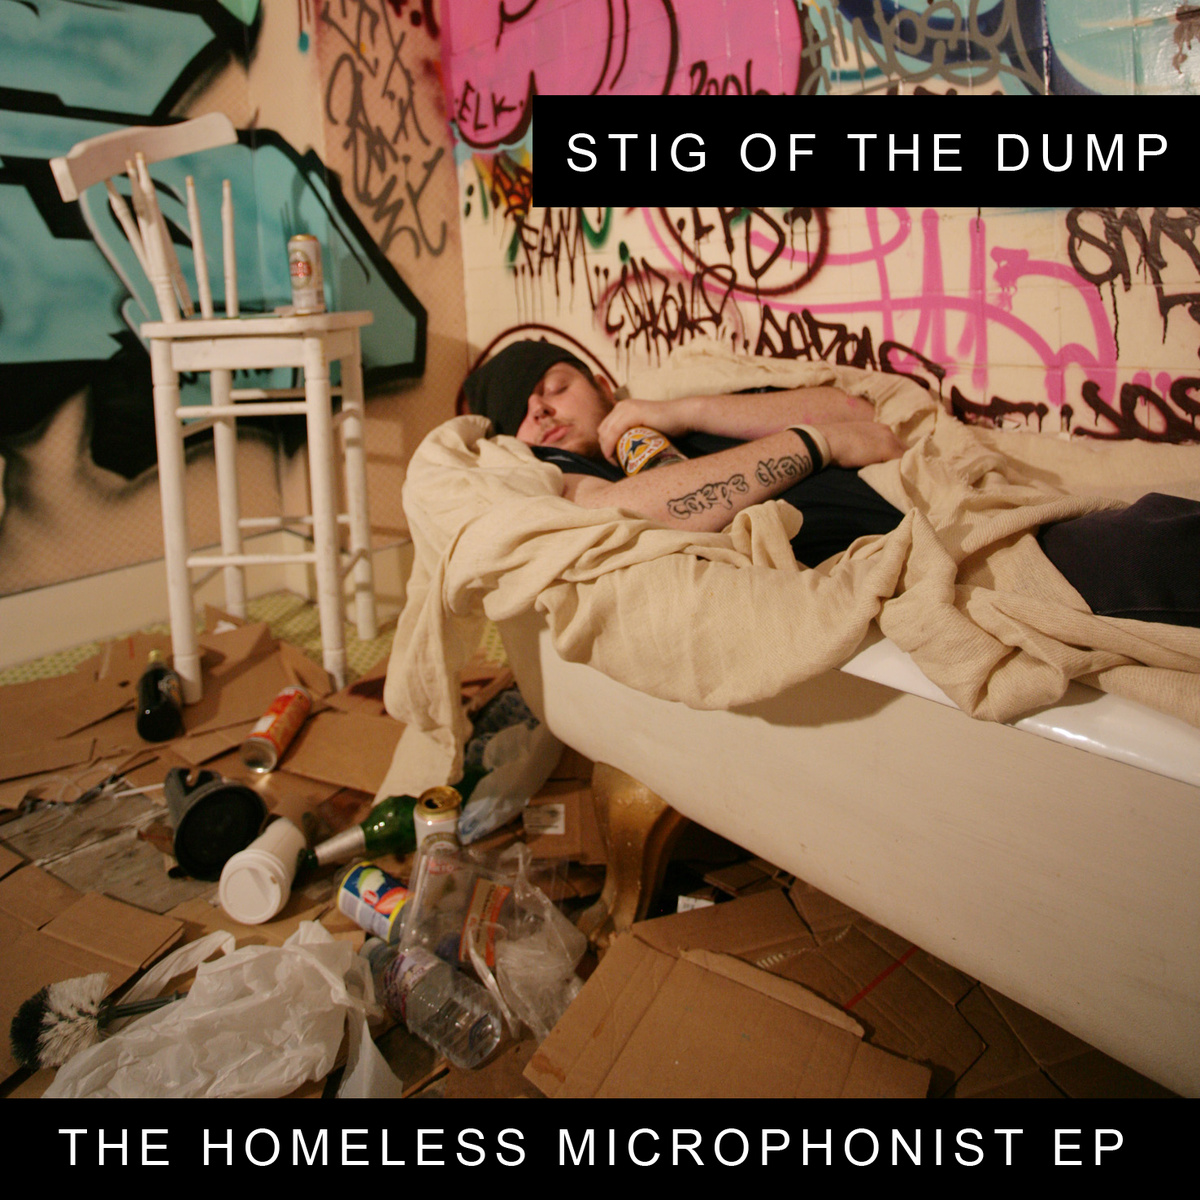 The Homeless Microphonist E.P.